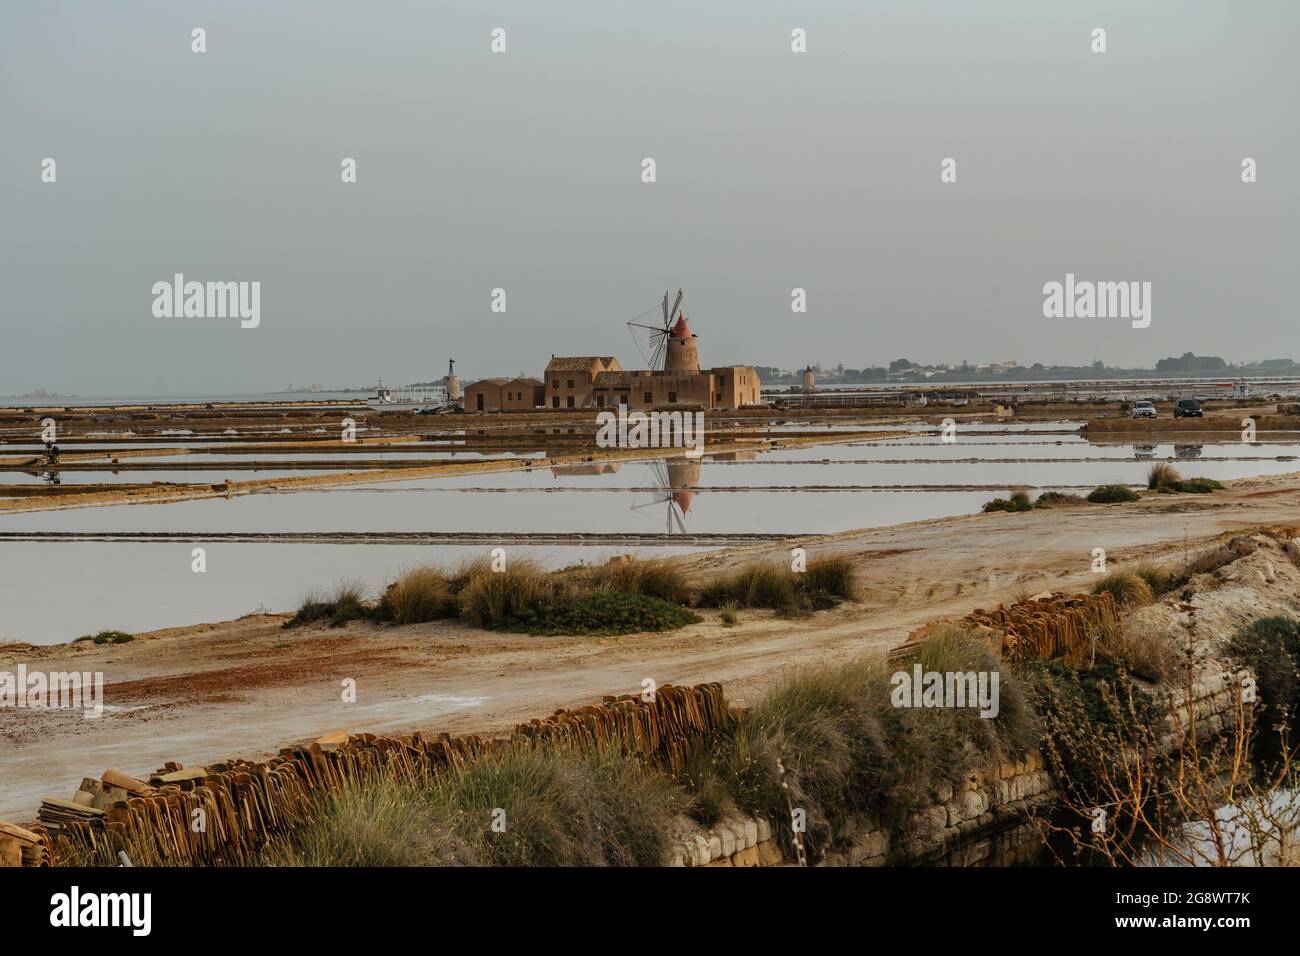 Saline of the Laguna Marsala,Sicily,Italy.Nature reserve with beautiful windmills,brine pools shimmering with different colors,traditional production Stock Photo